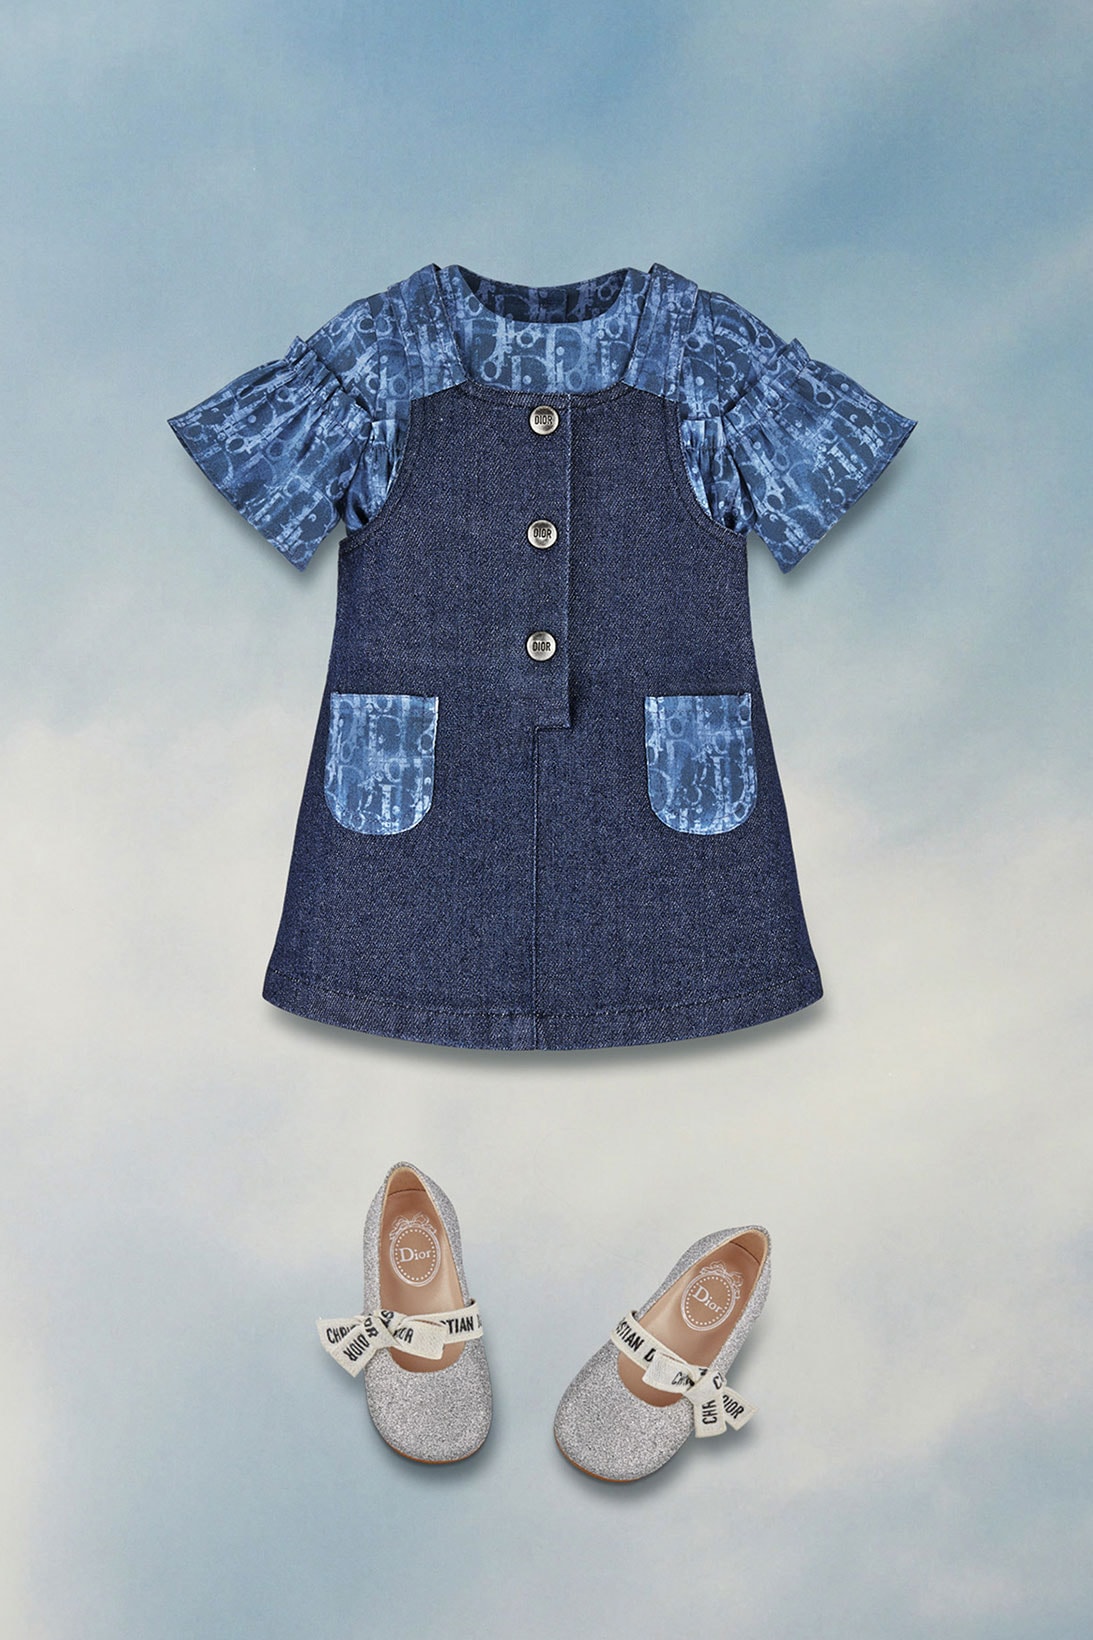 dior spring summer 2021 ss21 kids collection little girls toddlers denim overall dress shoes